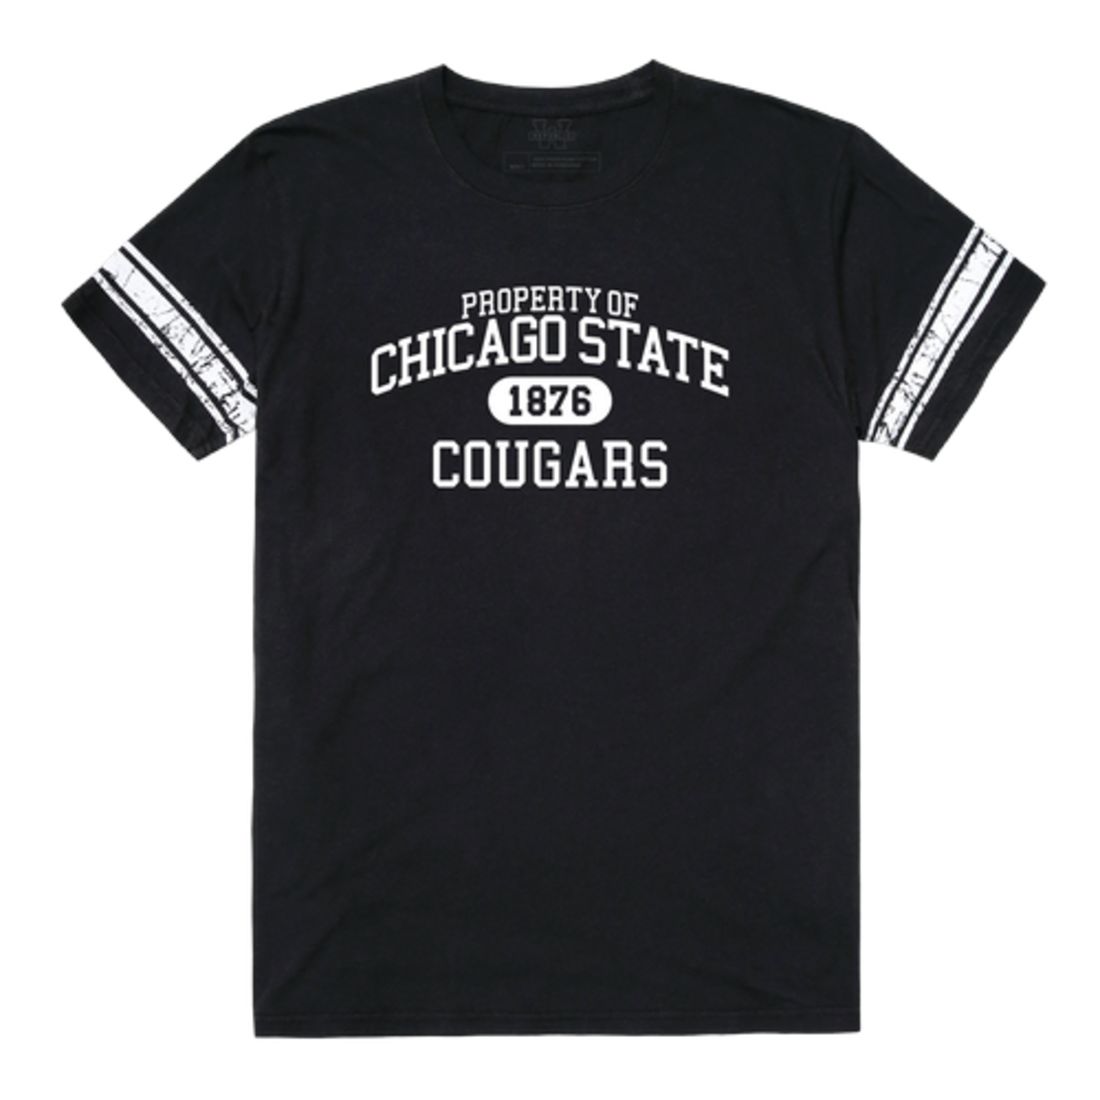 Chicago State University Cougars Property Football T-Shirt Tee